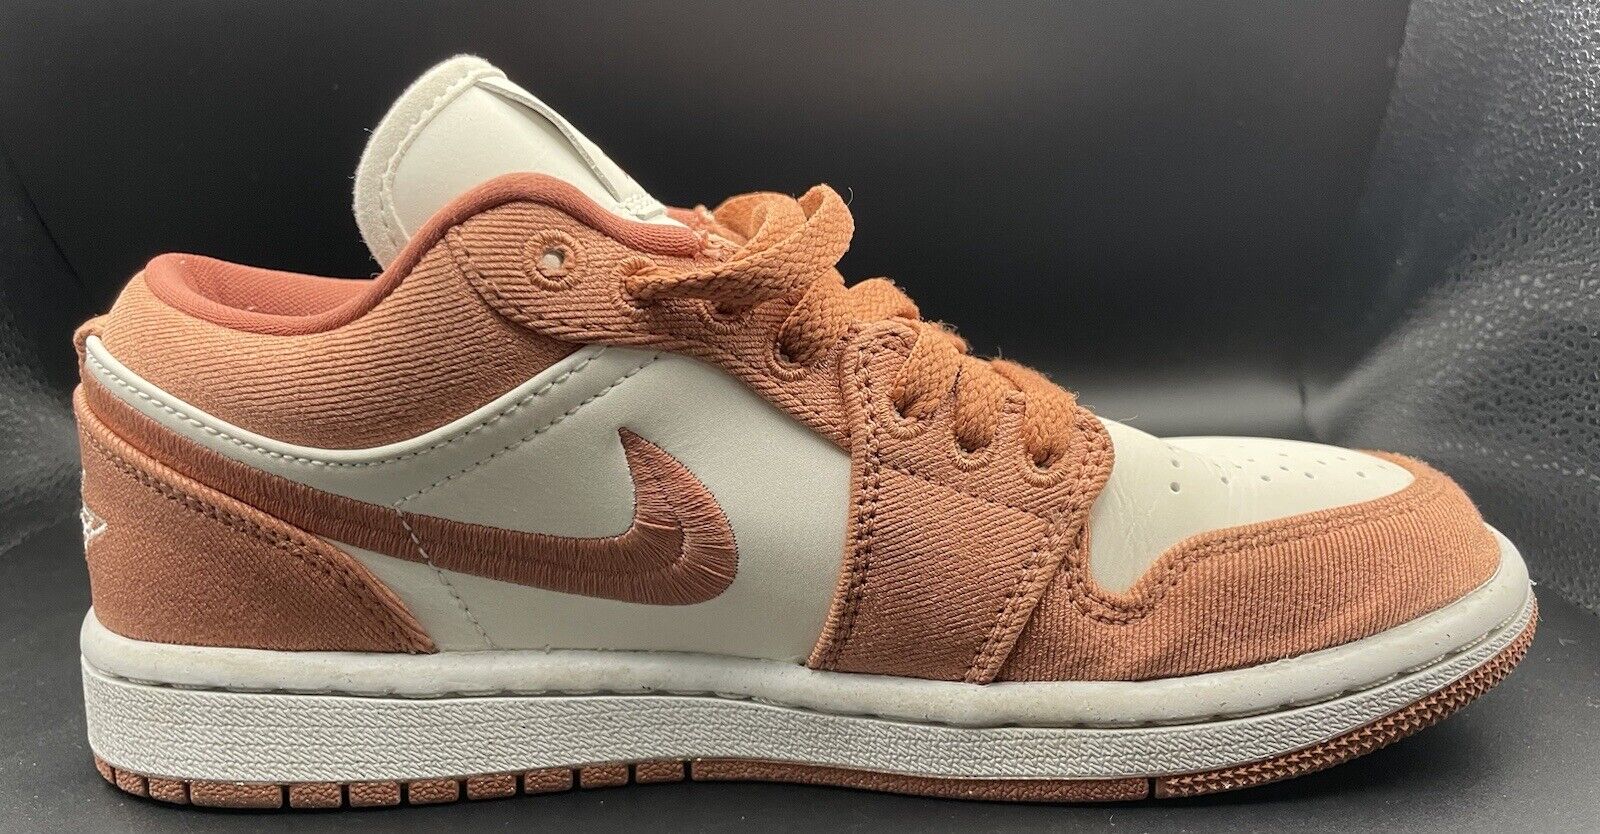 Women’s 6.5 Air Jordan 1 Low Se Peach Canvas Great Condition Used 🔥🔥